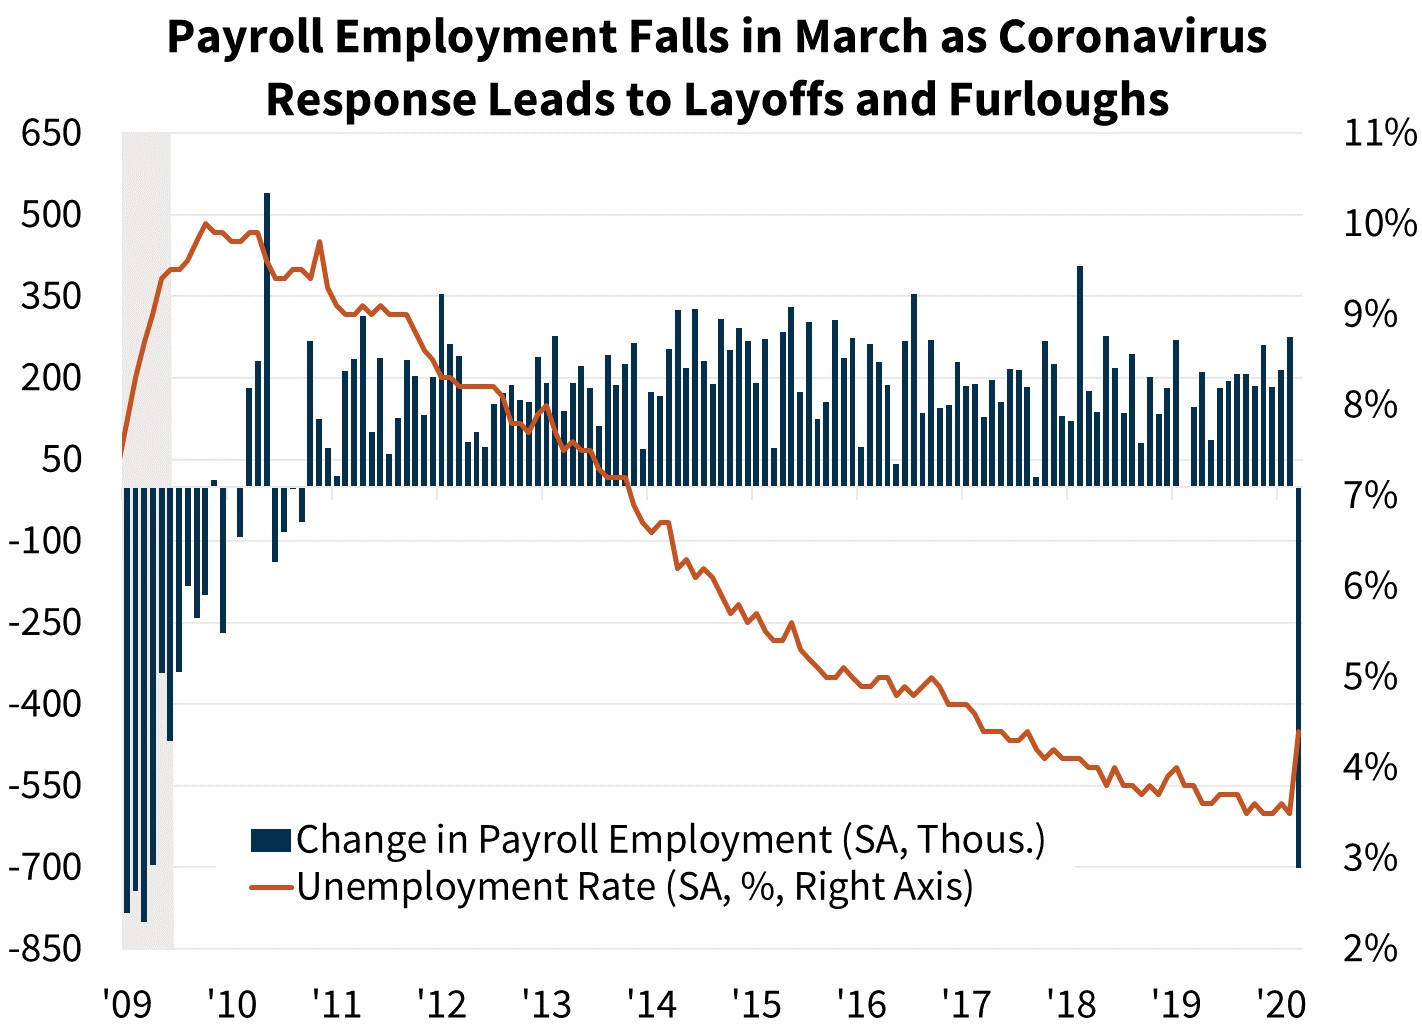  Payroll Employment Falls in March as Coronavirus Response Leads to Layoffs and Furloughs 